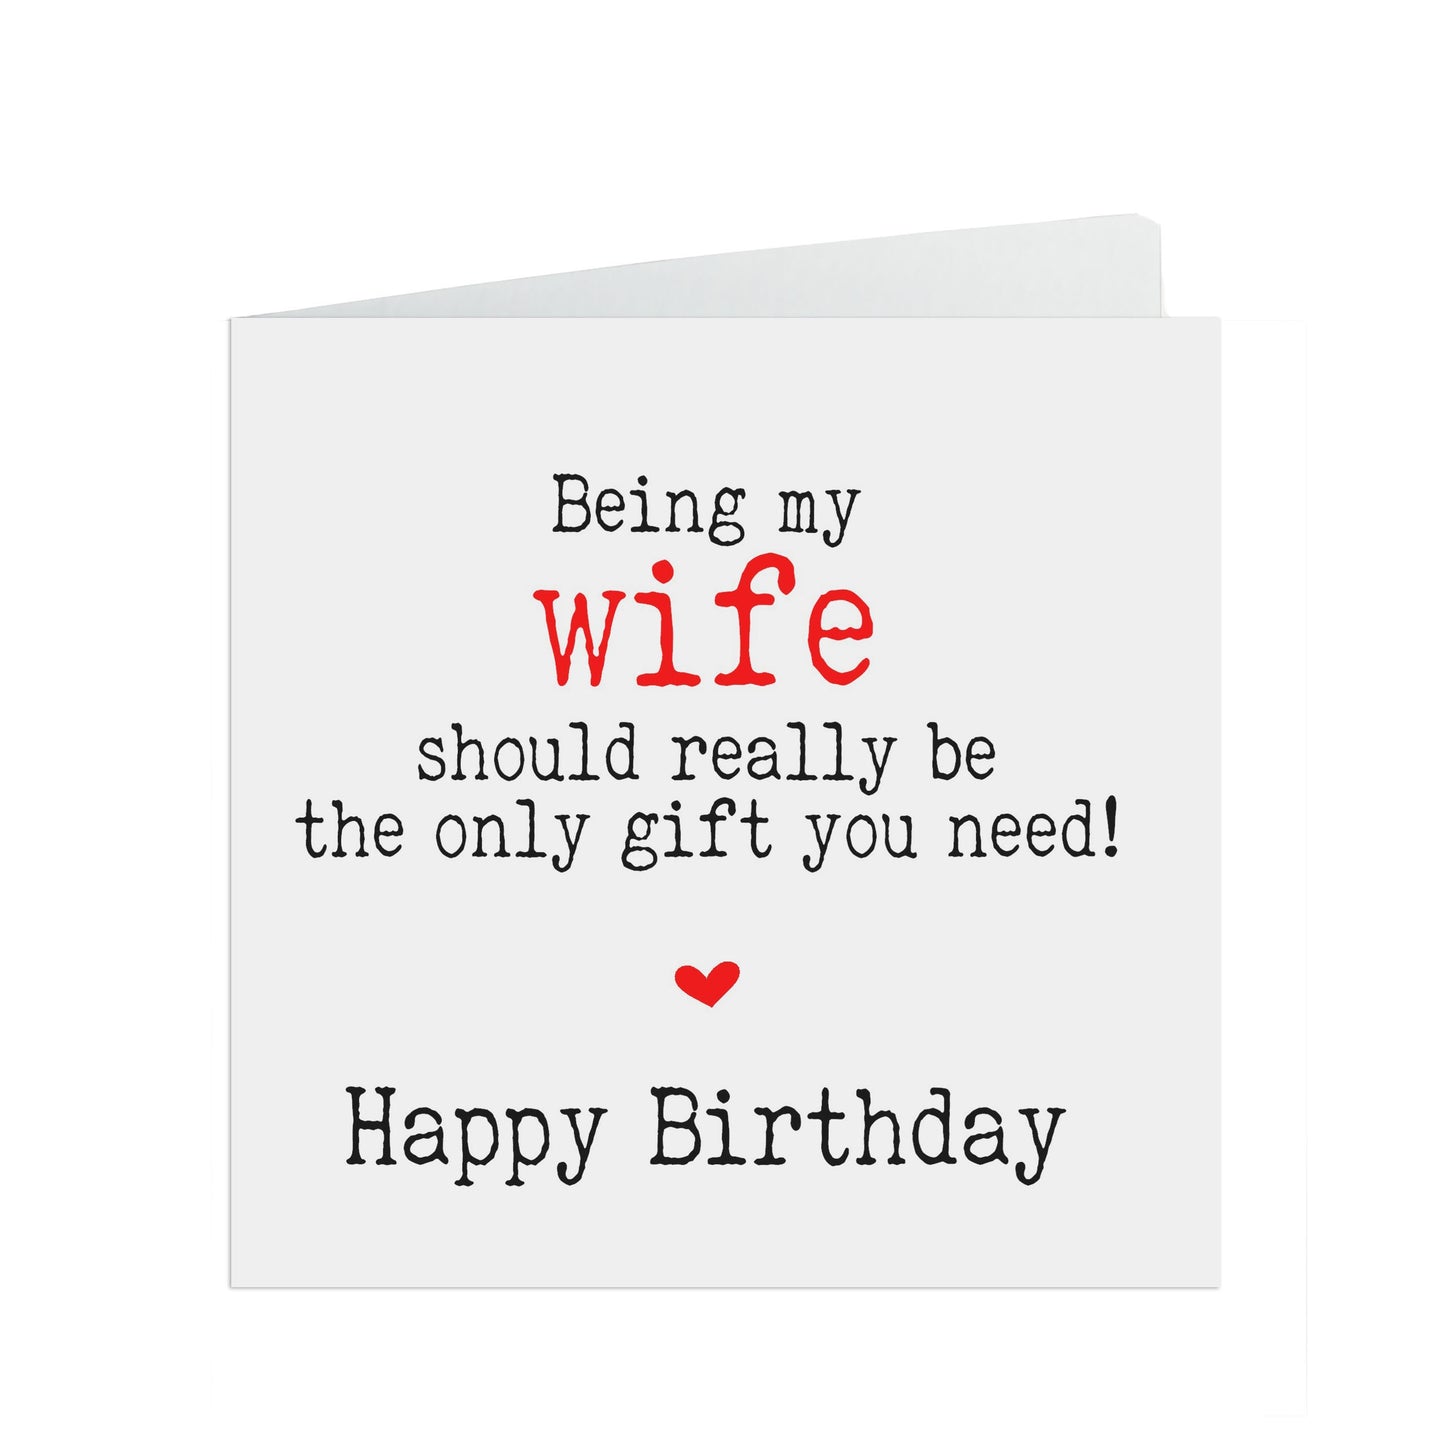 Funny Birthday Card, Being My Wife Should Really Be The Only Gift You Need!